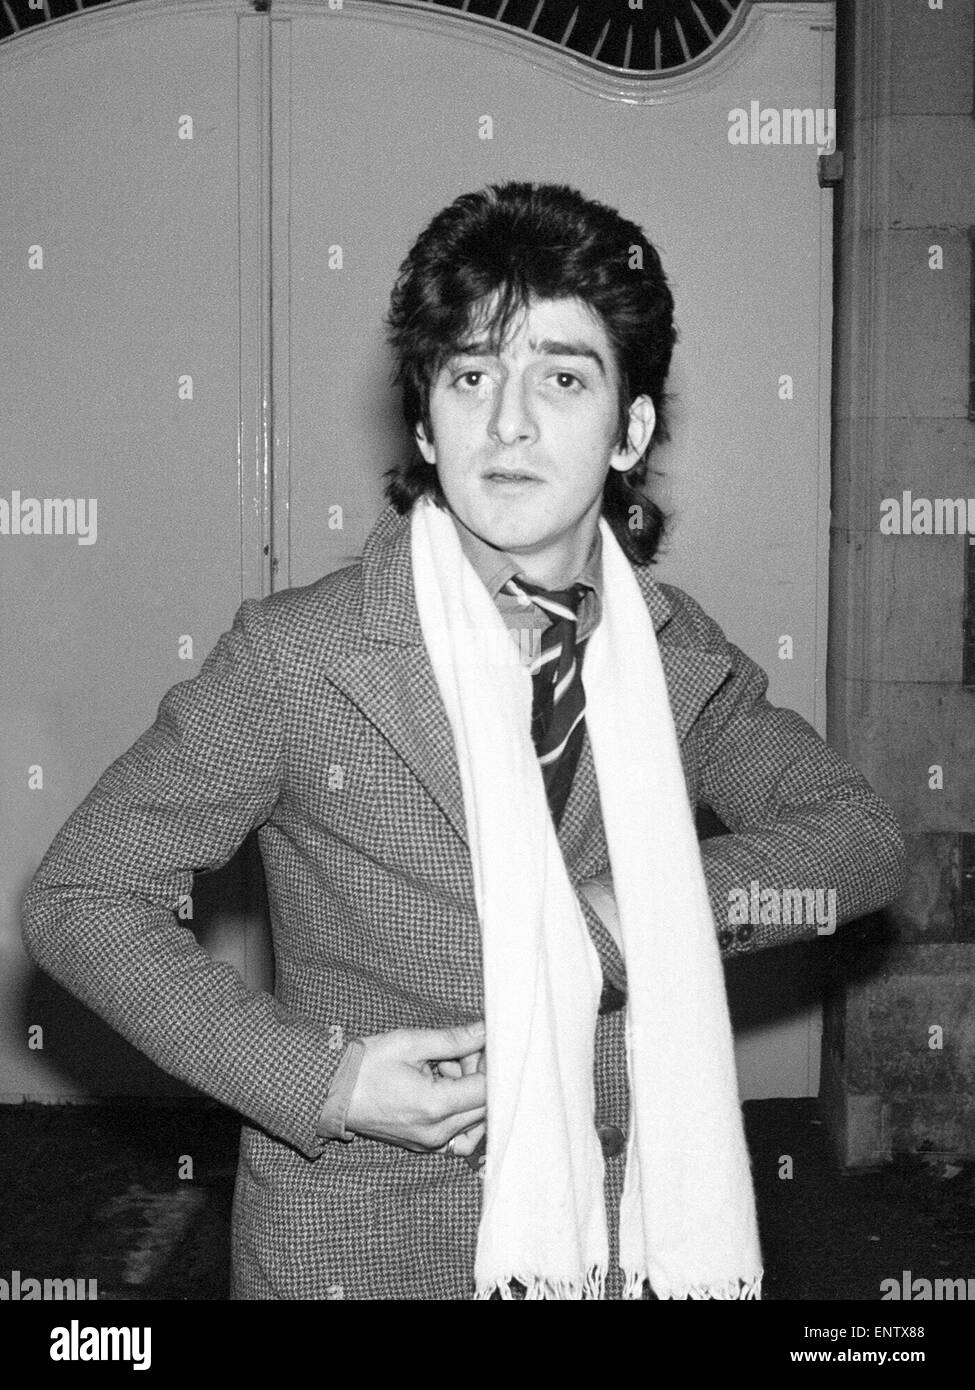 Gary Holton, actor and singer, attends inquest into the death of friend ...